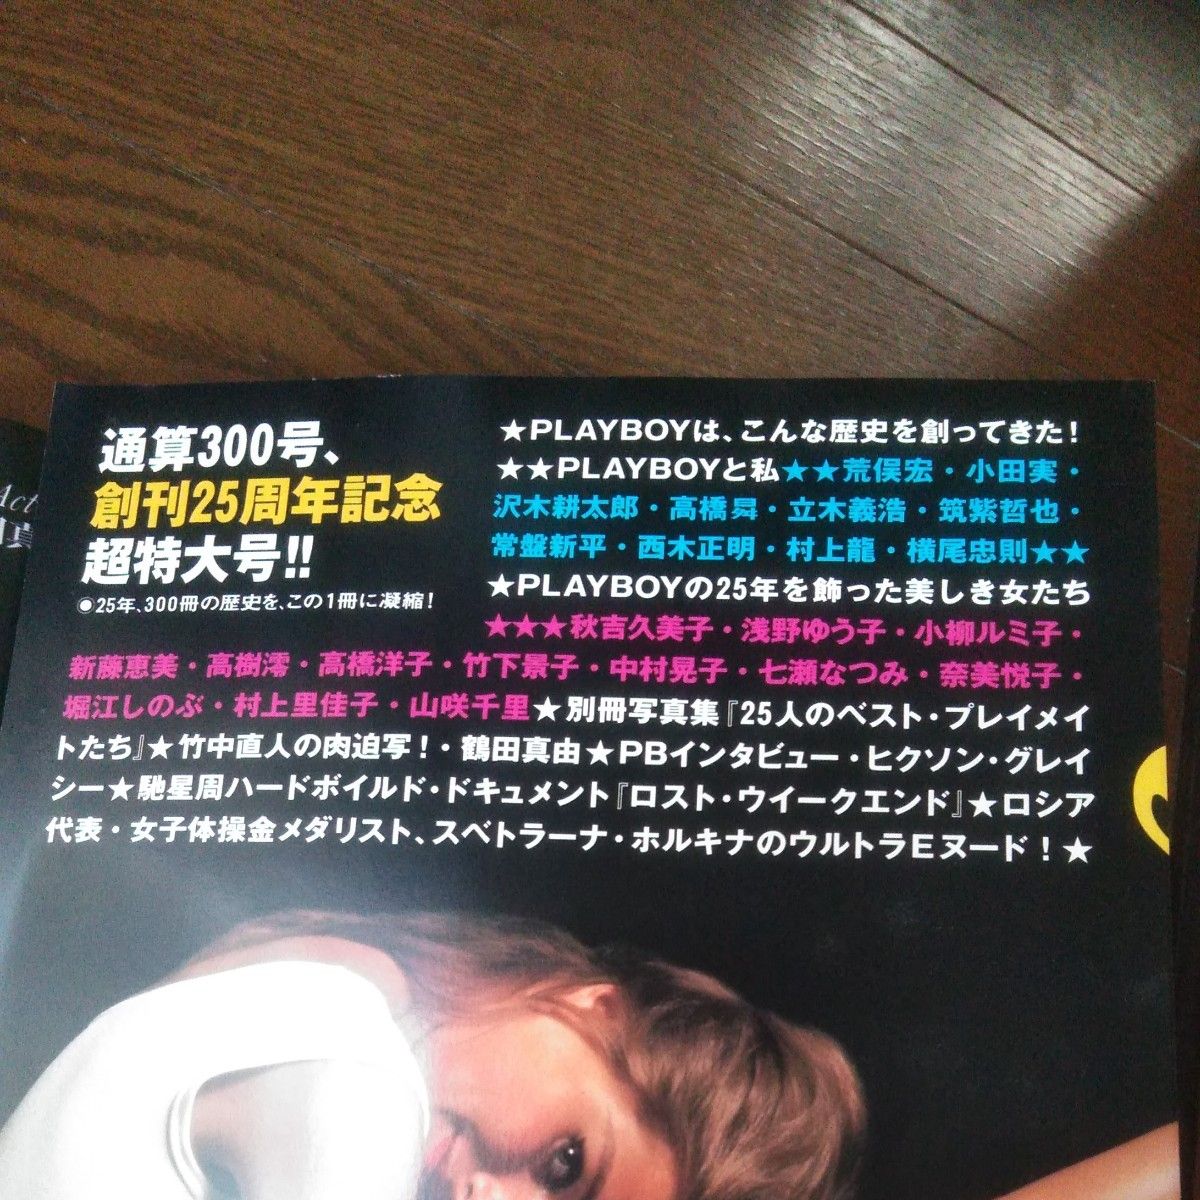 PLAY BOY special issue No.300